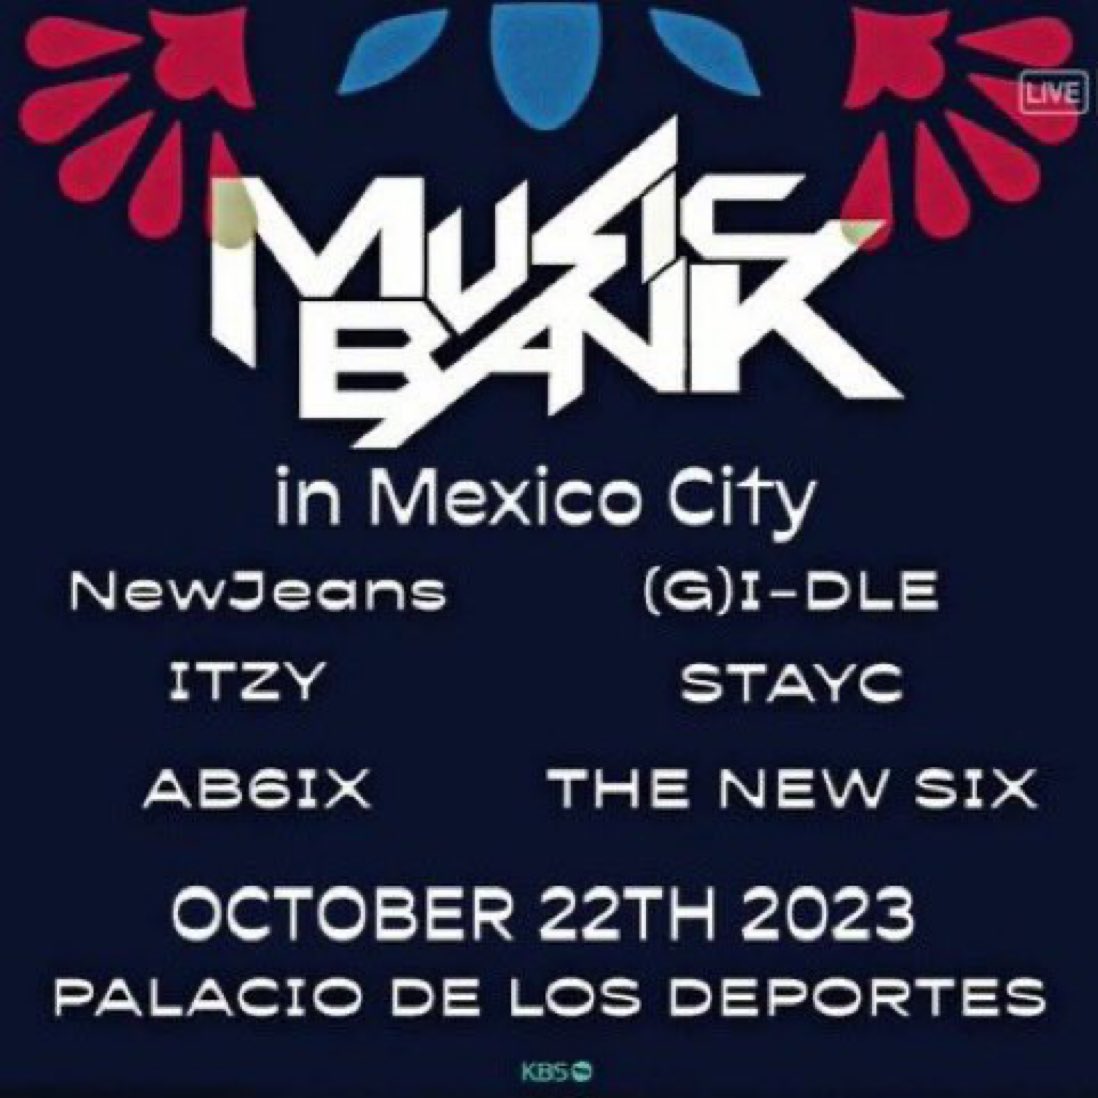 RT @hellooo530: gidle is rumoured to perform at music bank in mexico on 22nd october ! https://t.co/87CDHnIM07